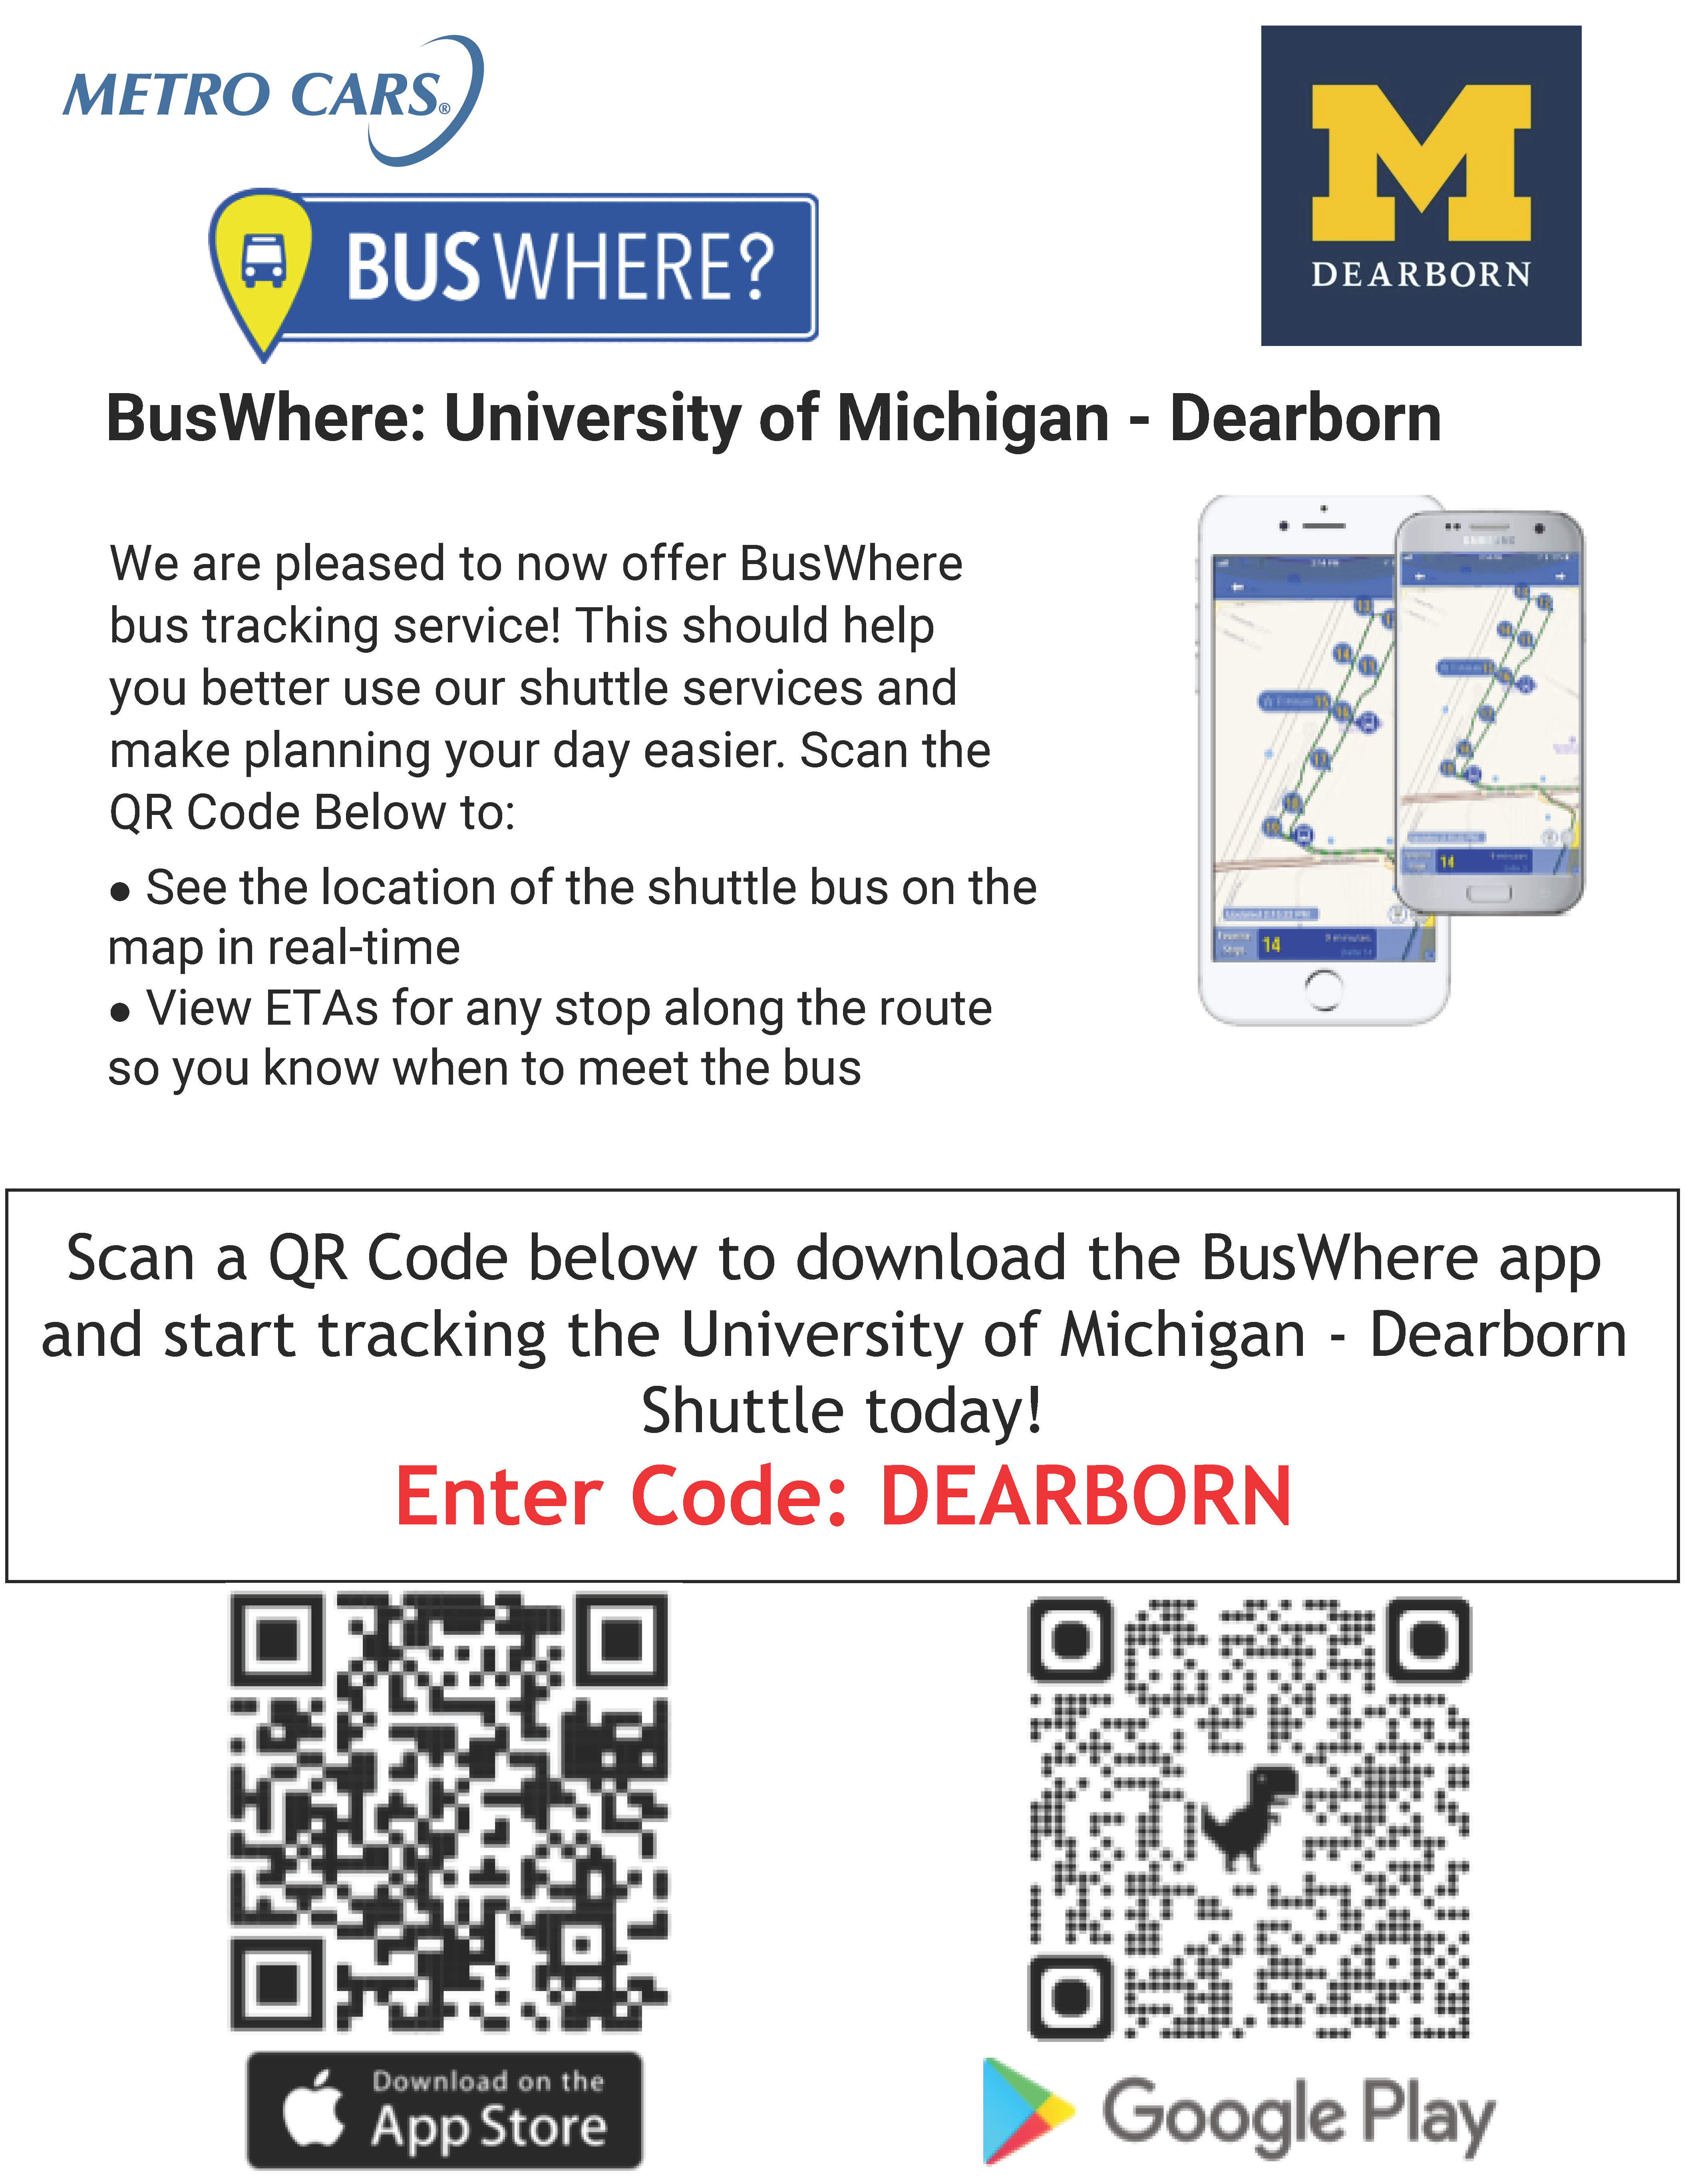 Flyer with QR Code to view the shuttle location in real-time